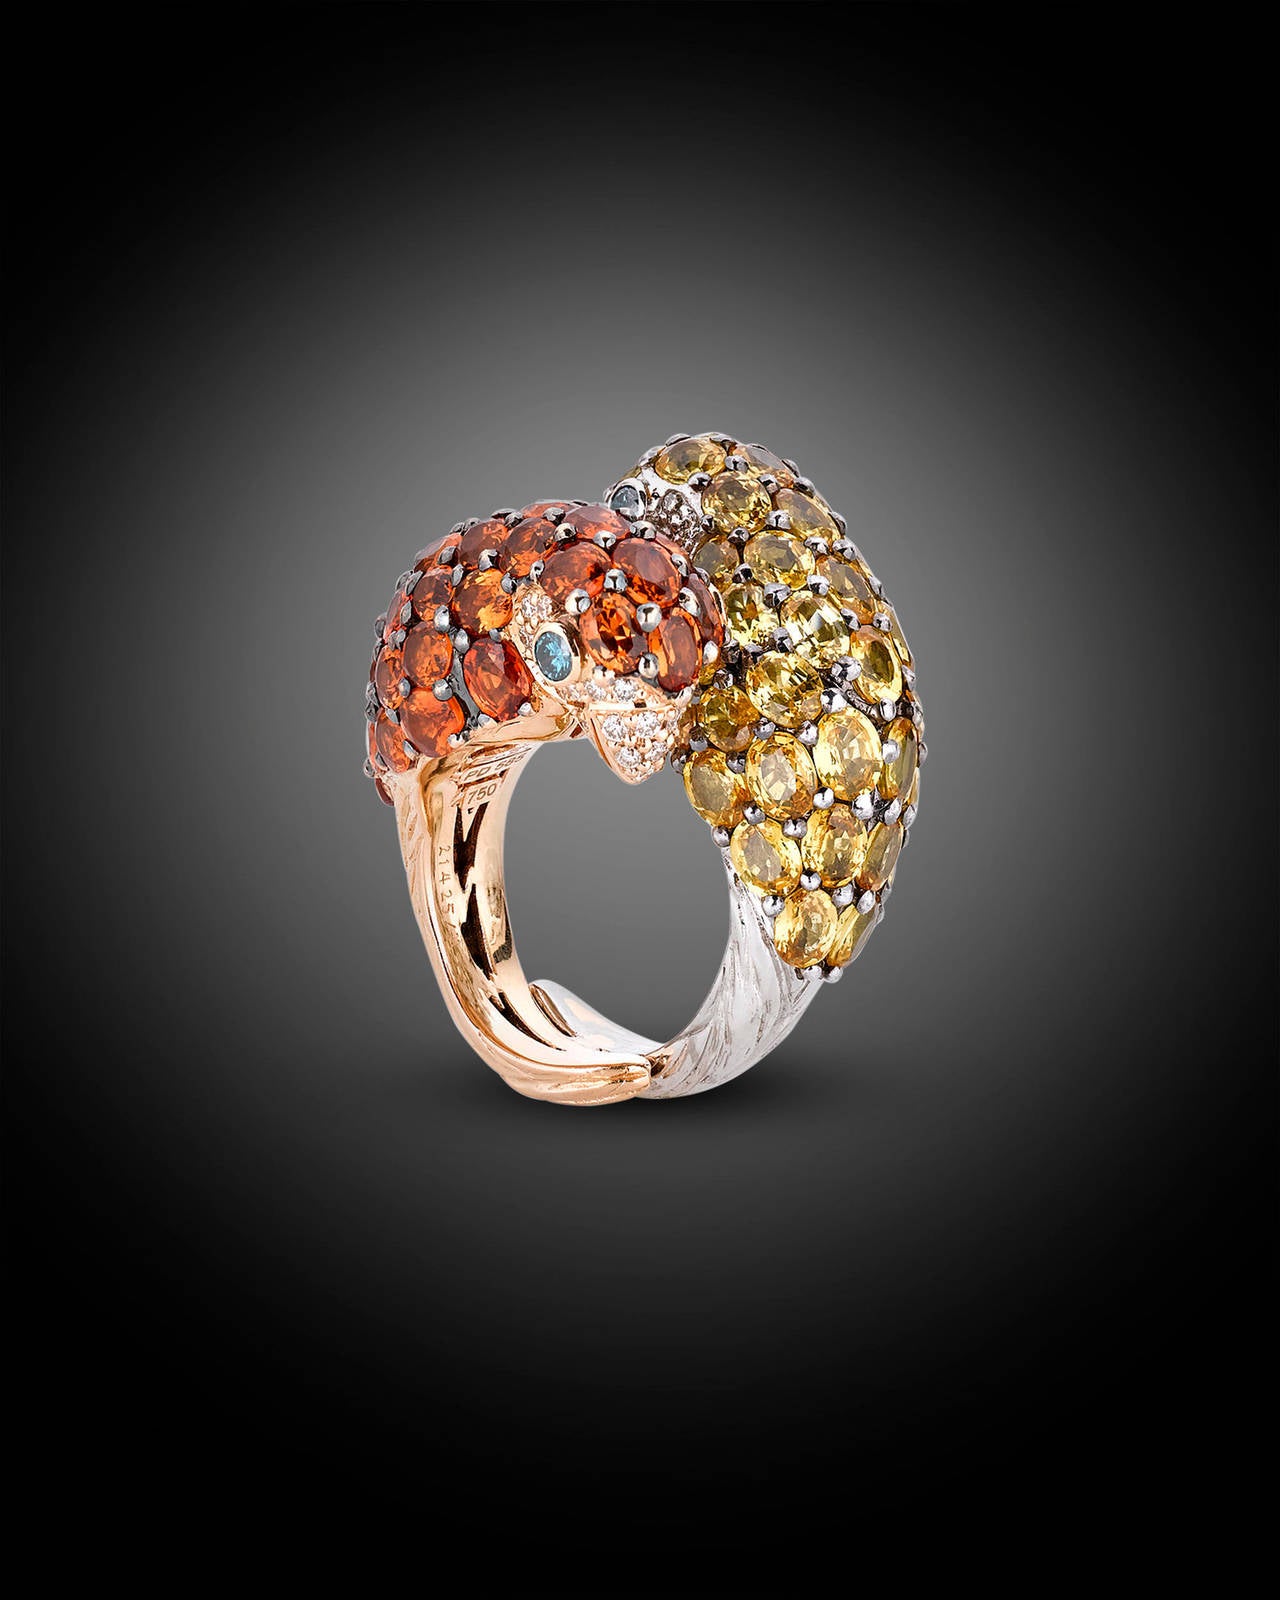 Glistening with the colors of a tropical sunset, this incredible bypass ring by Zorab Atelier de Creation takes the form of a pair of parrots brought to life by dazzling yellow and orange sapphires. Crafted of 18K gold, this incredible ring is set